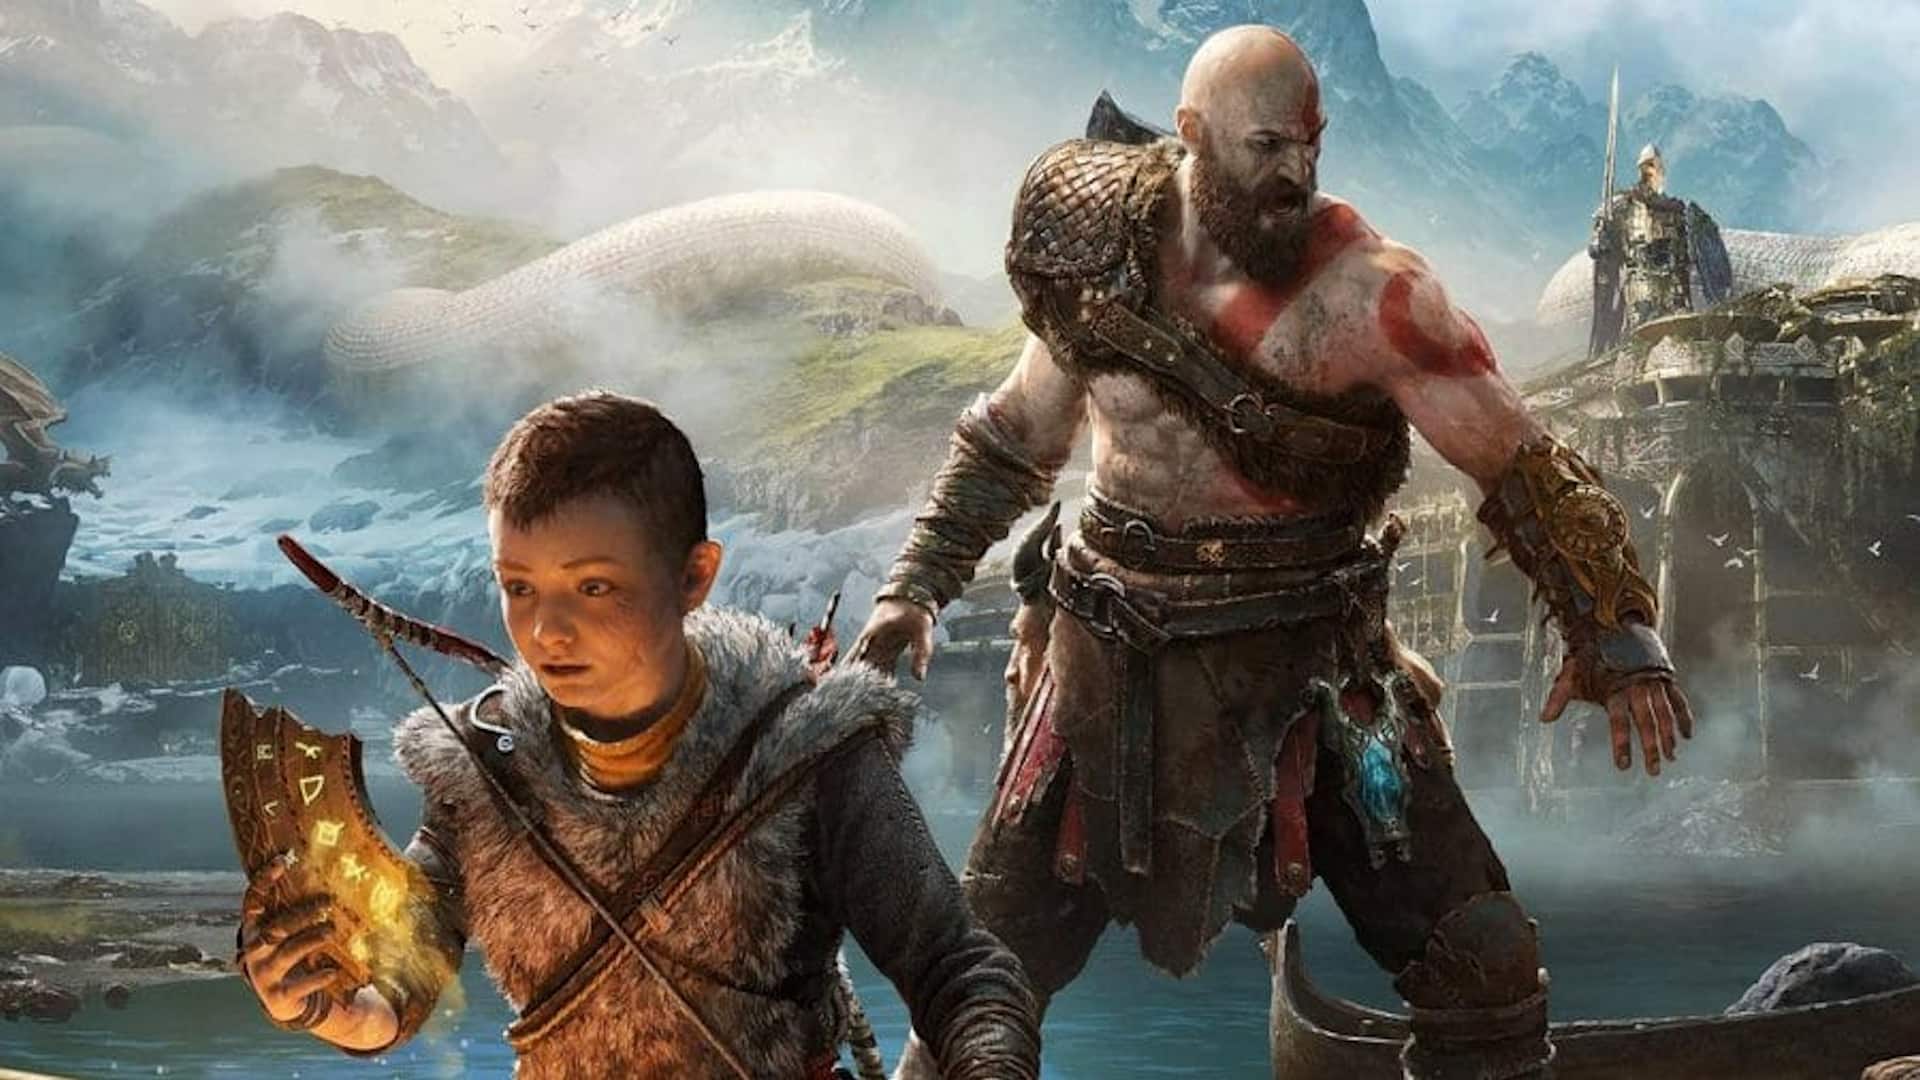 God of War TV Series Coming To Amazon Prime